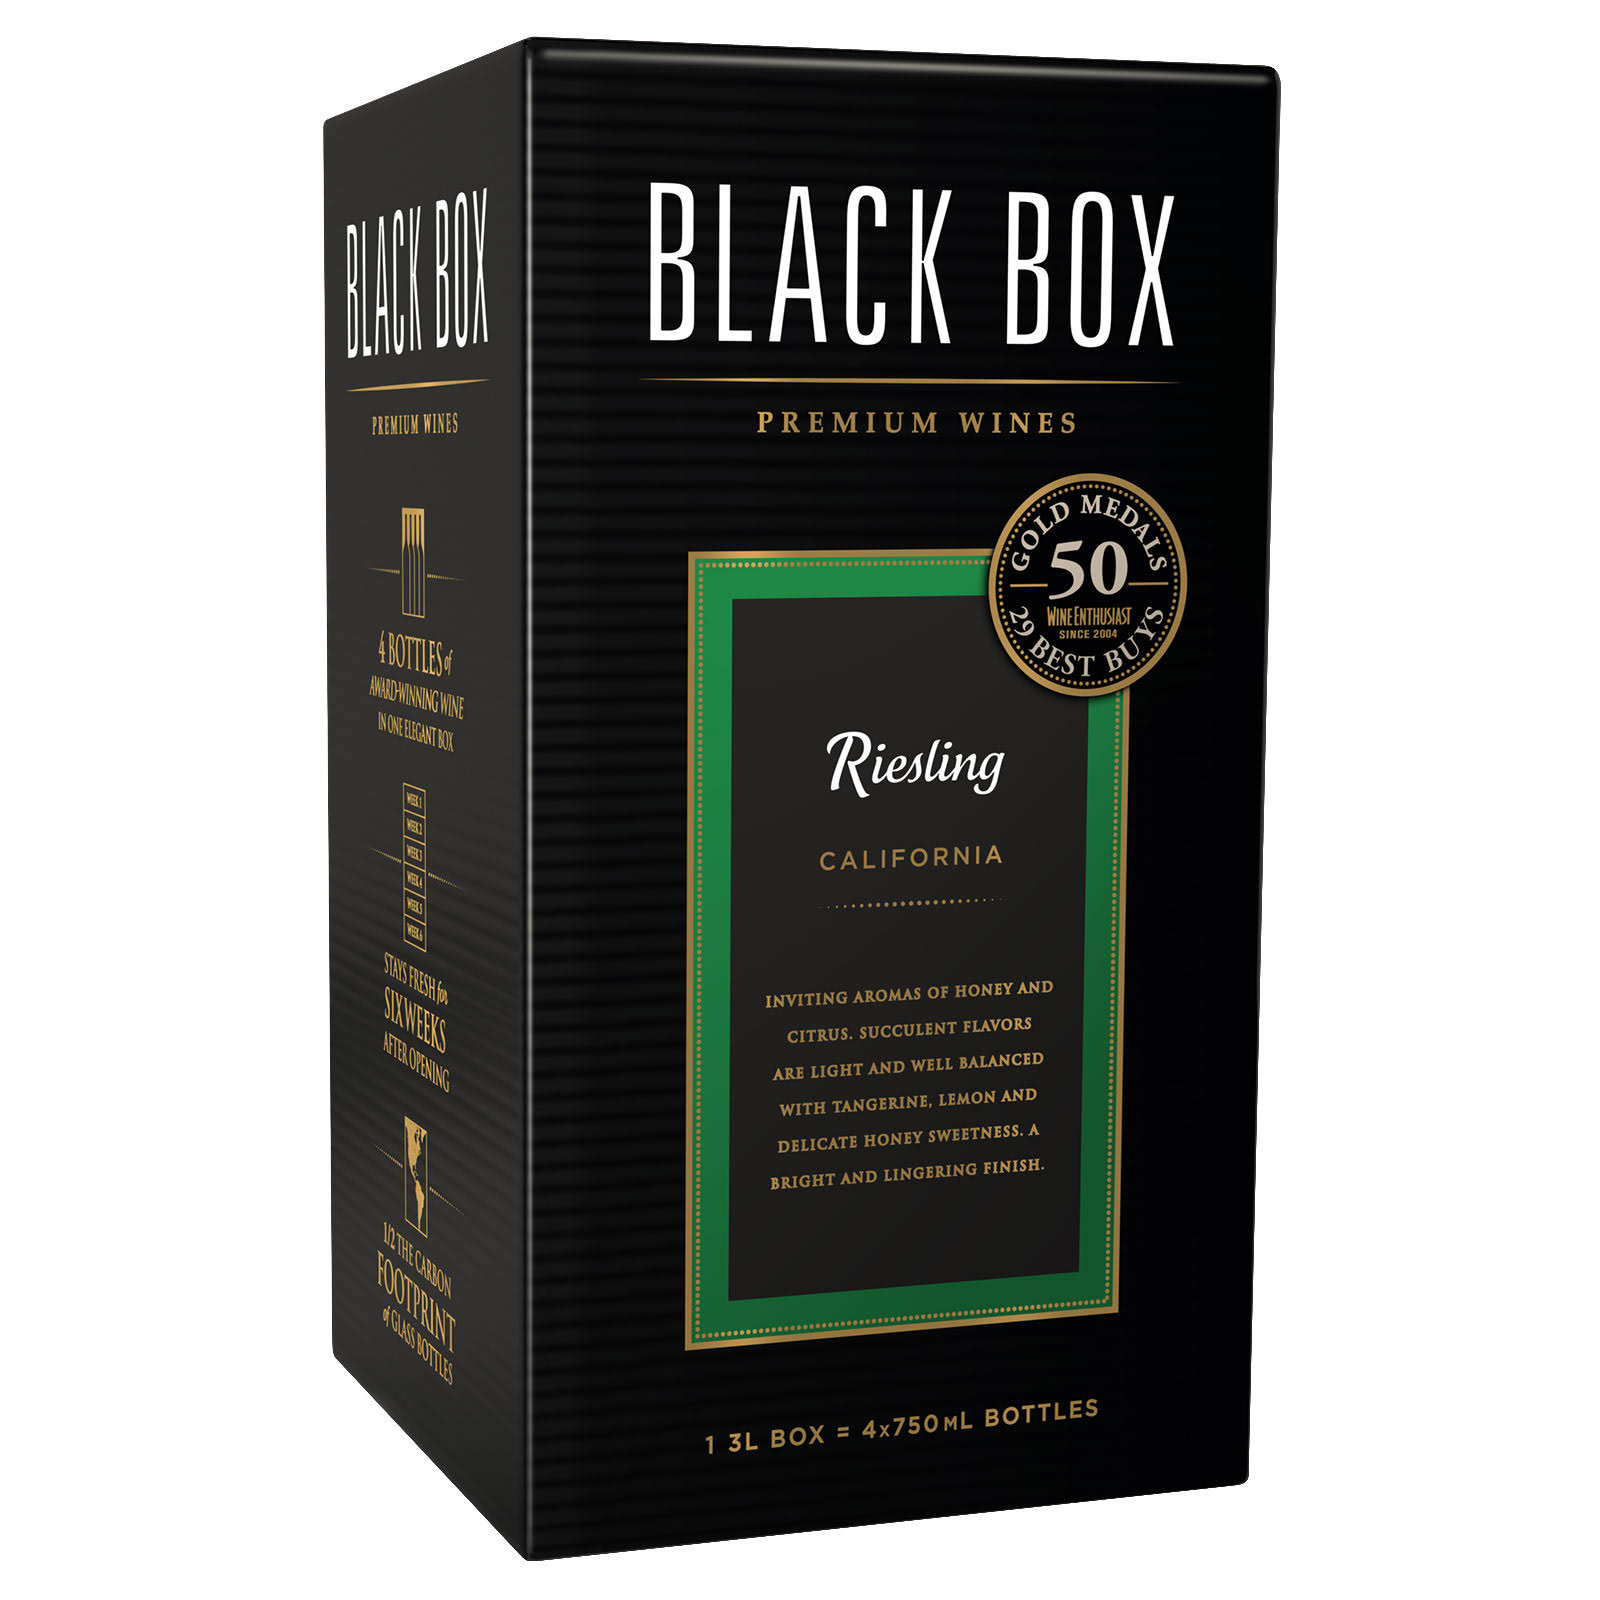 Black Box Wines Riesling - Columbia Valley, 2008